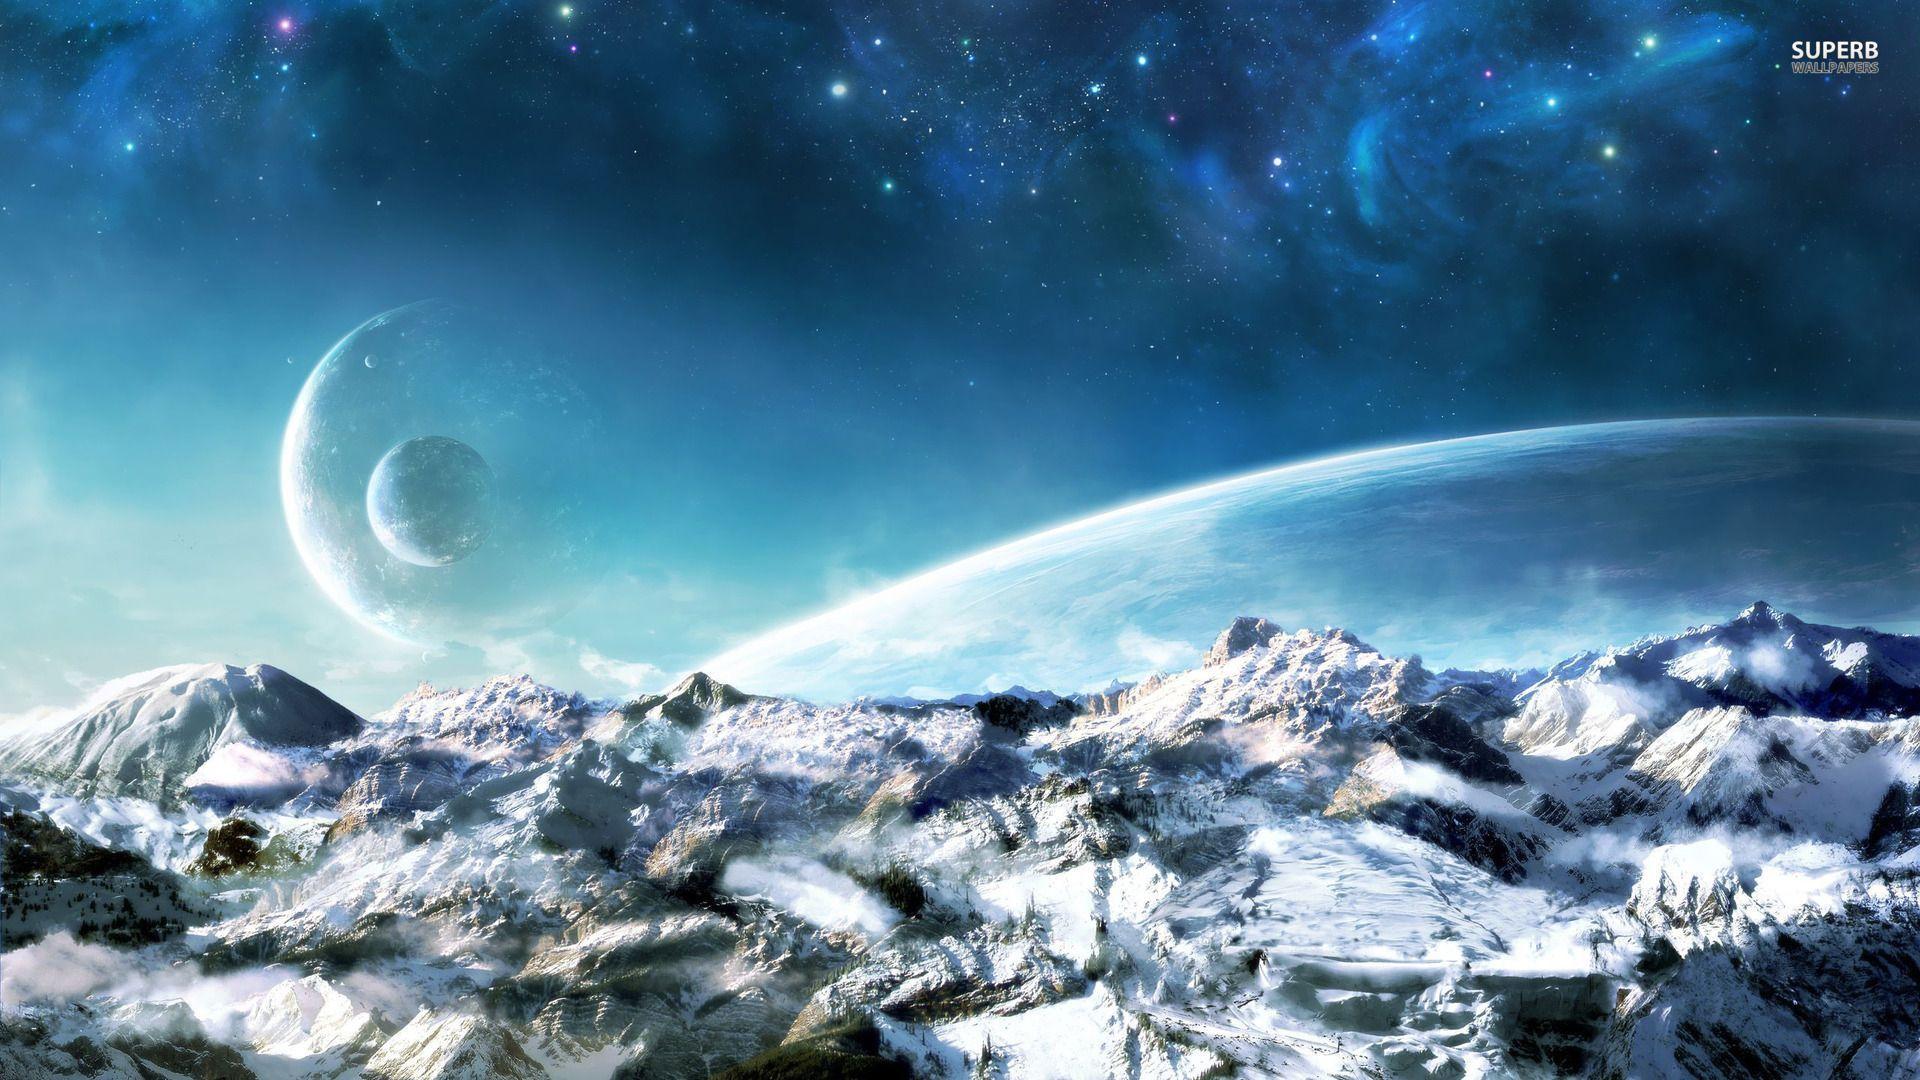 Planets over the snowy mountains wallpaper wallpaper - #